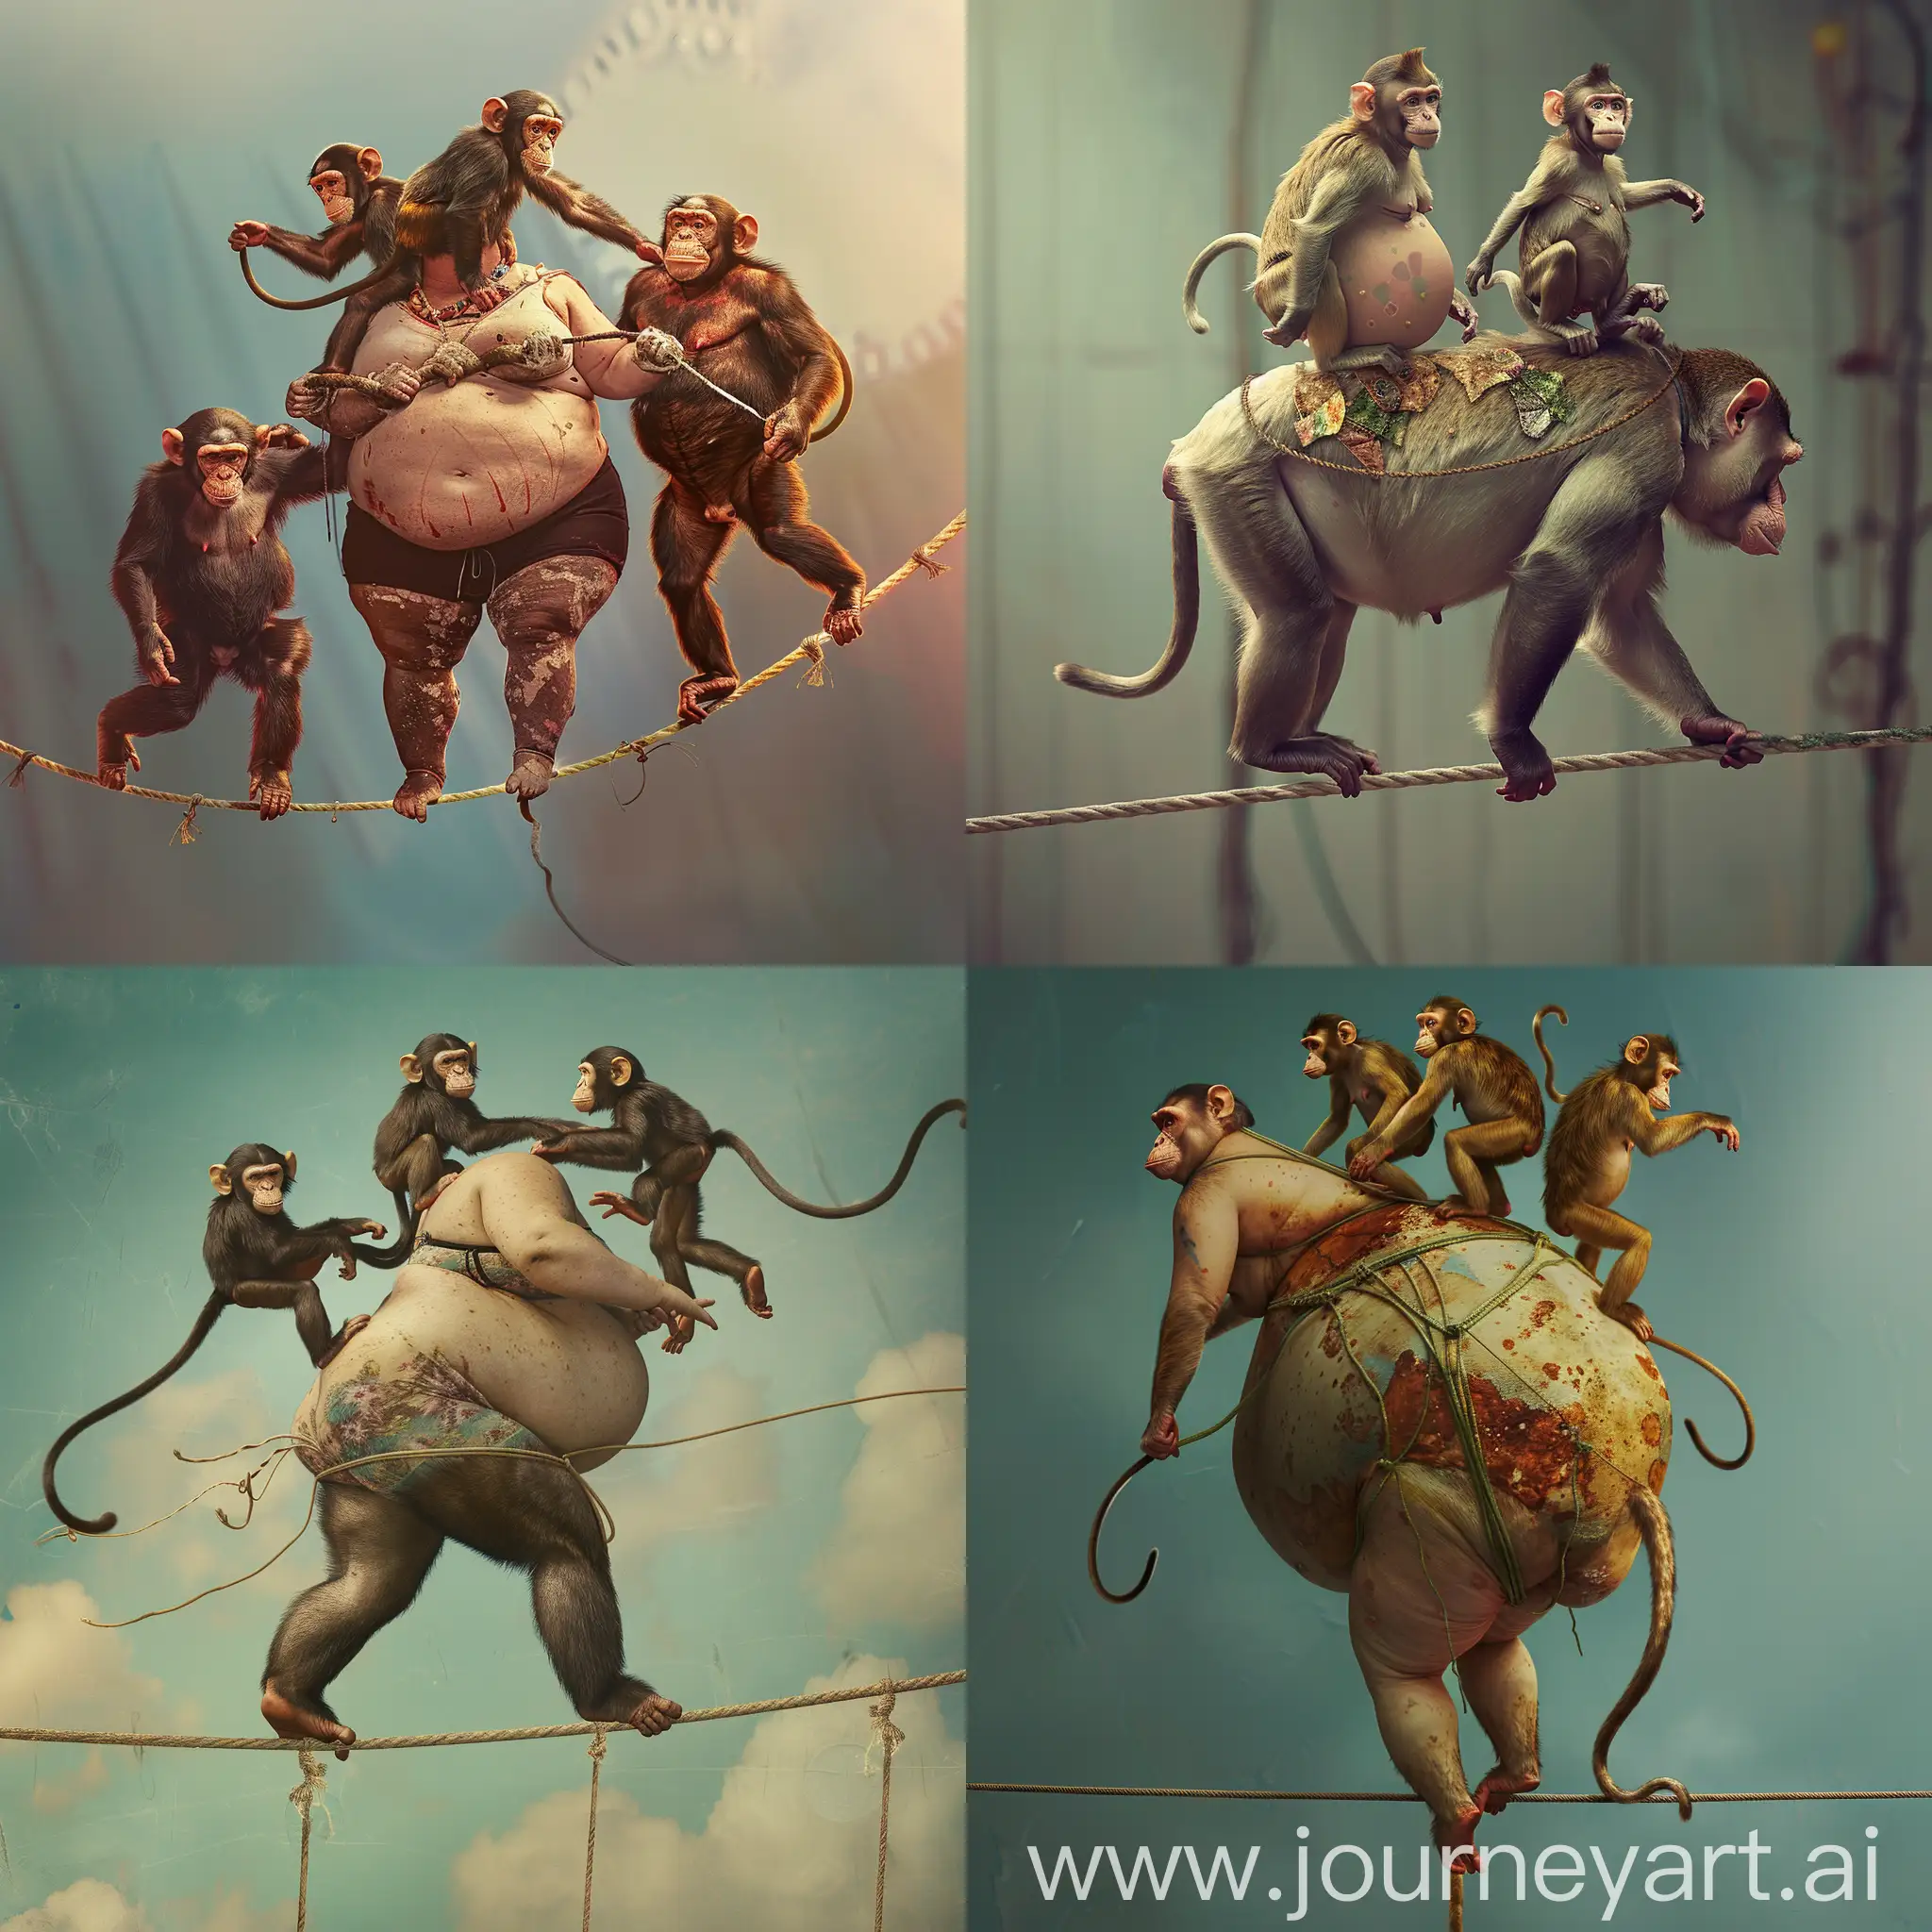 Talent-Show-Performance-Fat-Girl-Balancing-on-Tightrope-with-Ugly-Monkeys